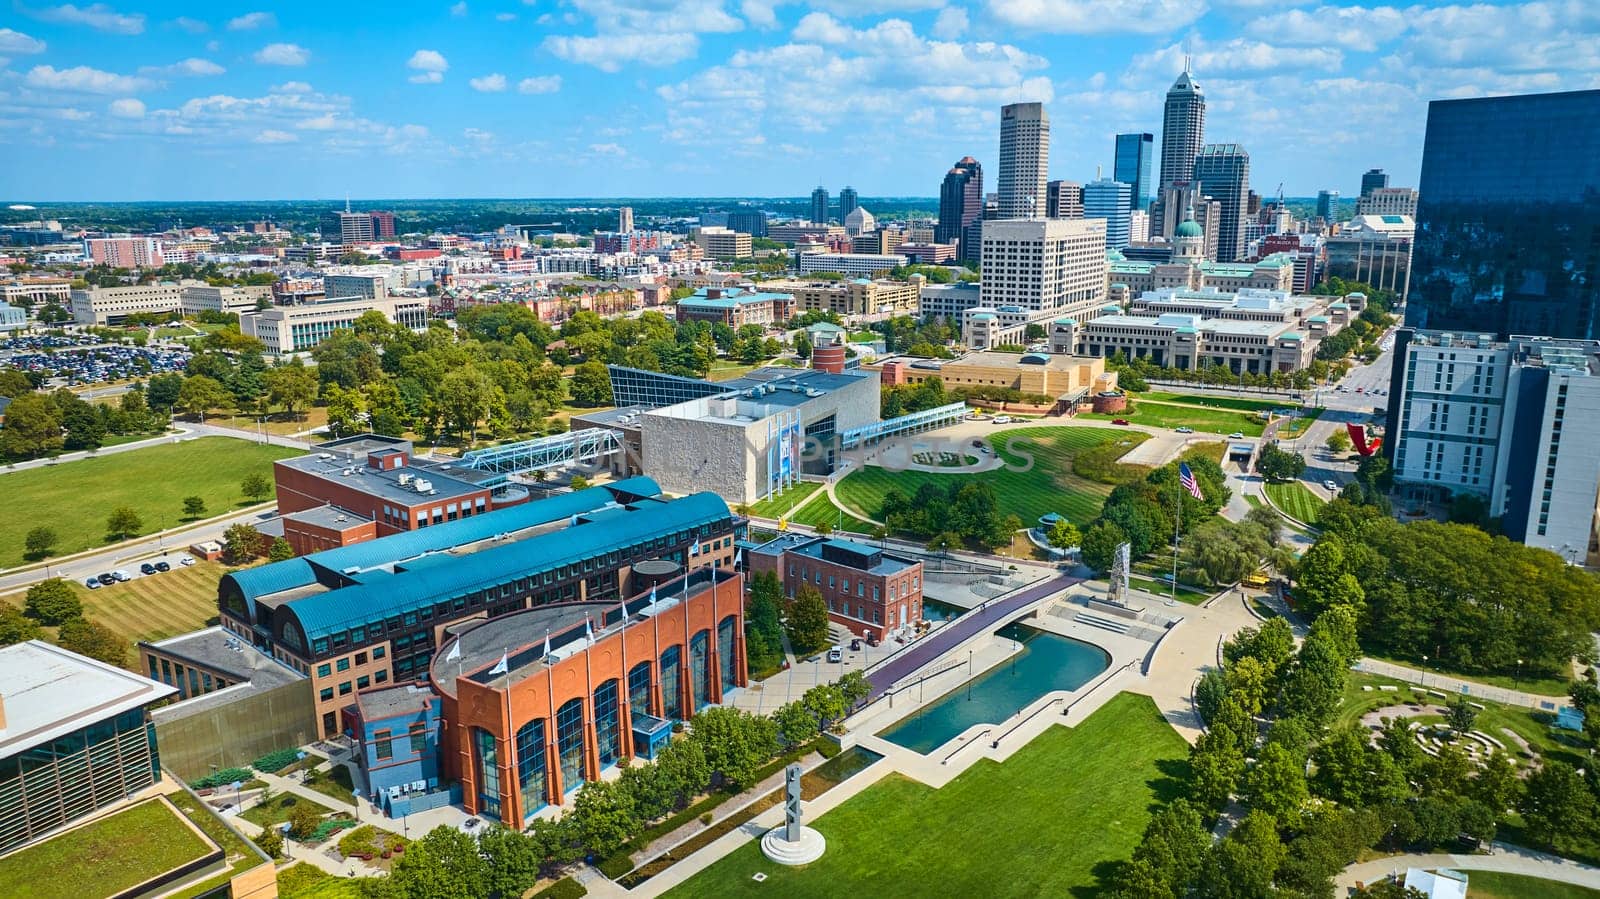 Aerial View of Urban Park and Cityscape in Indianapolis by njproductions